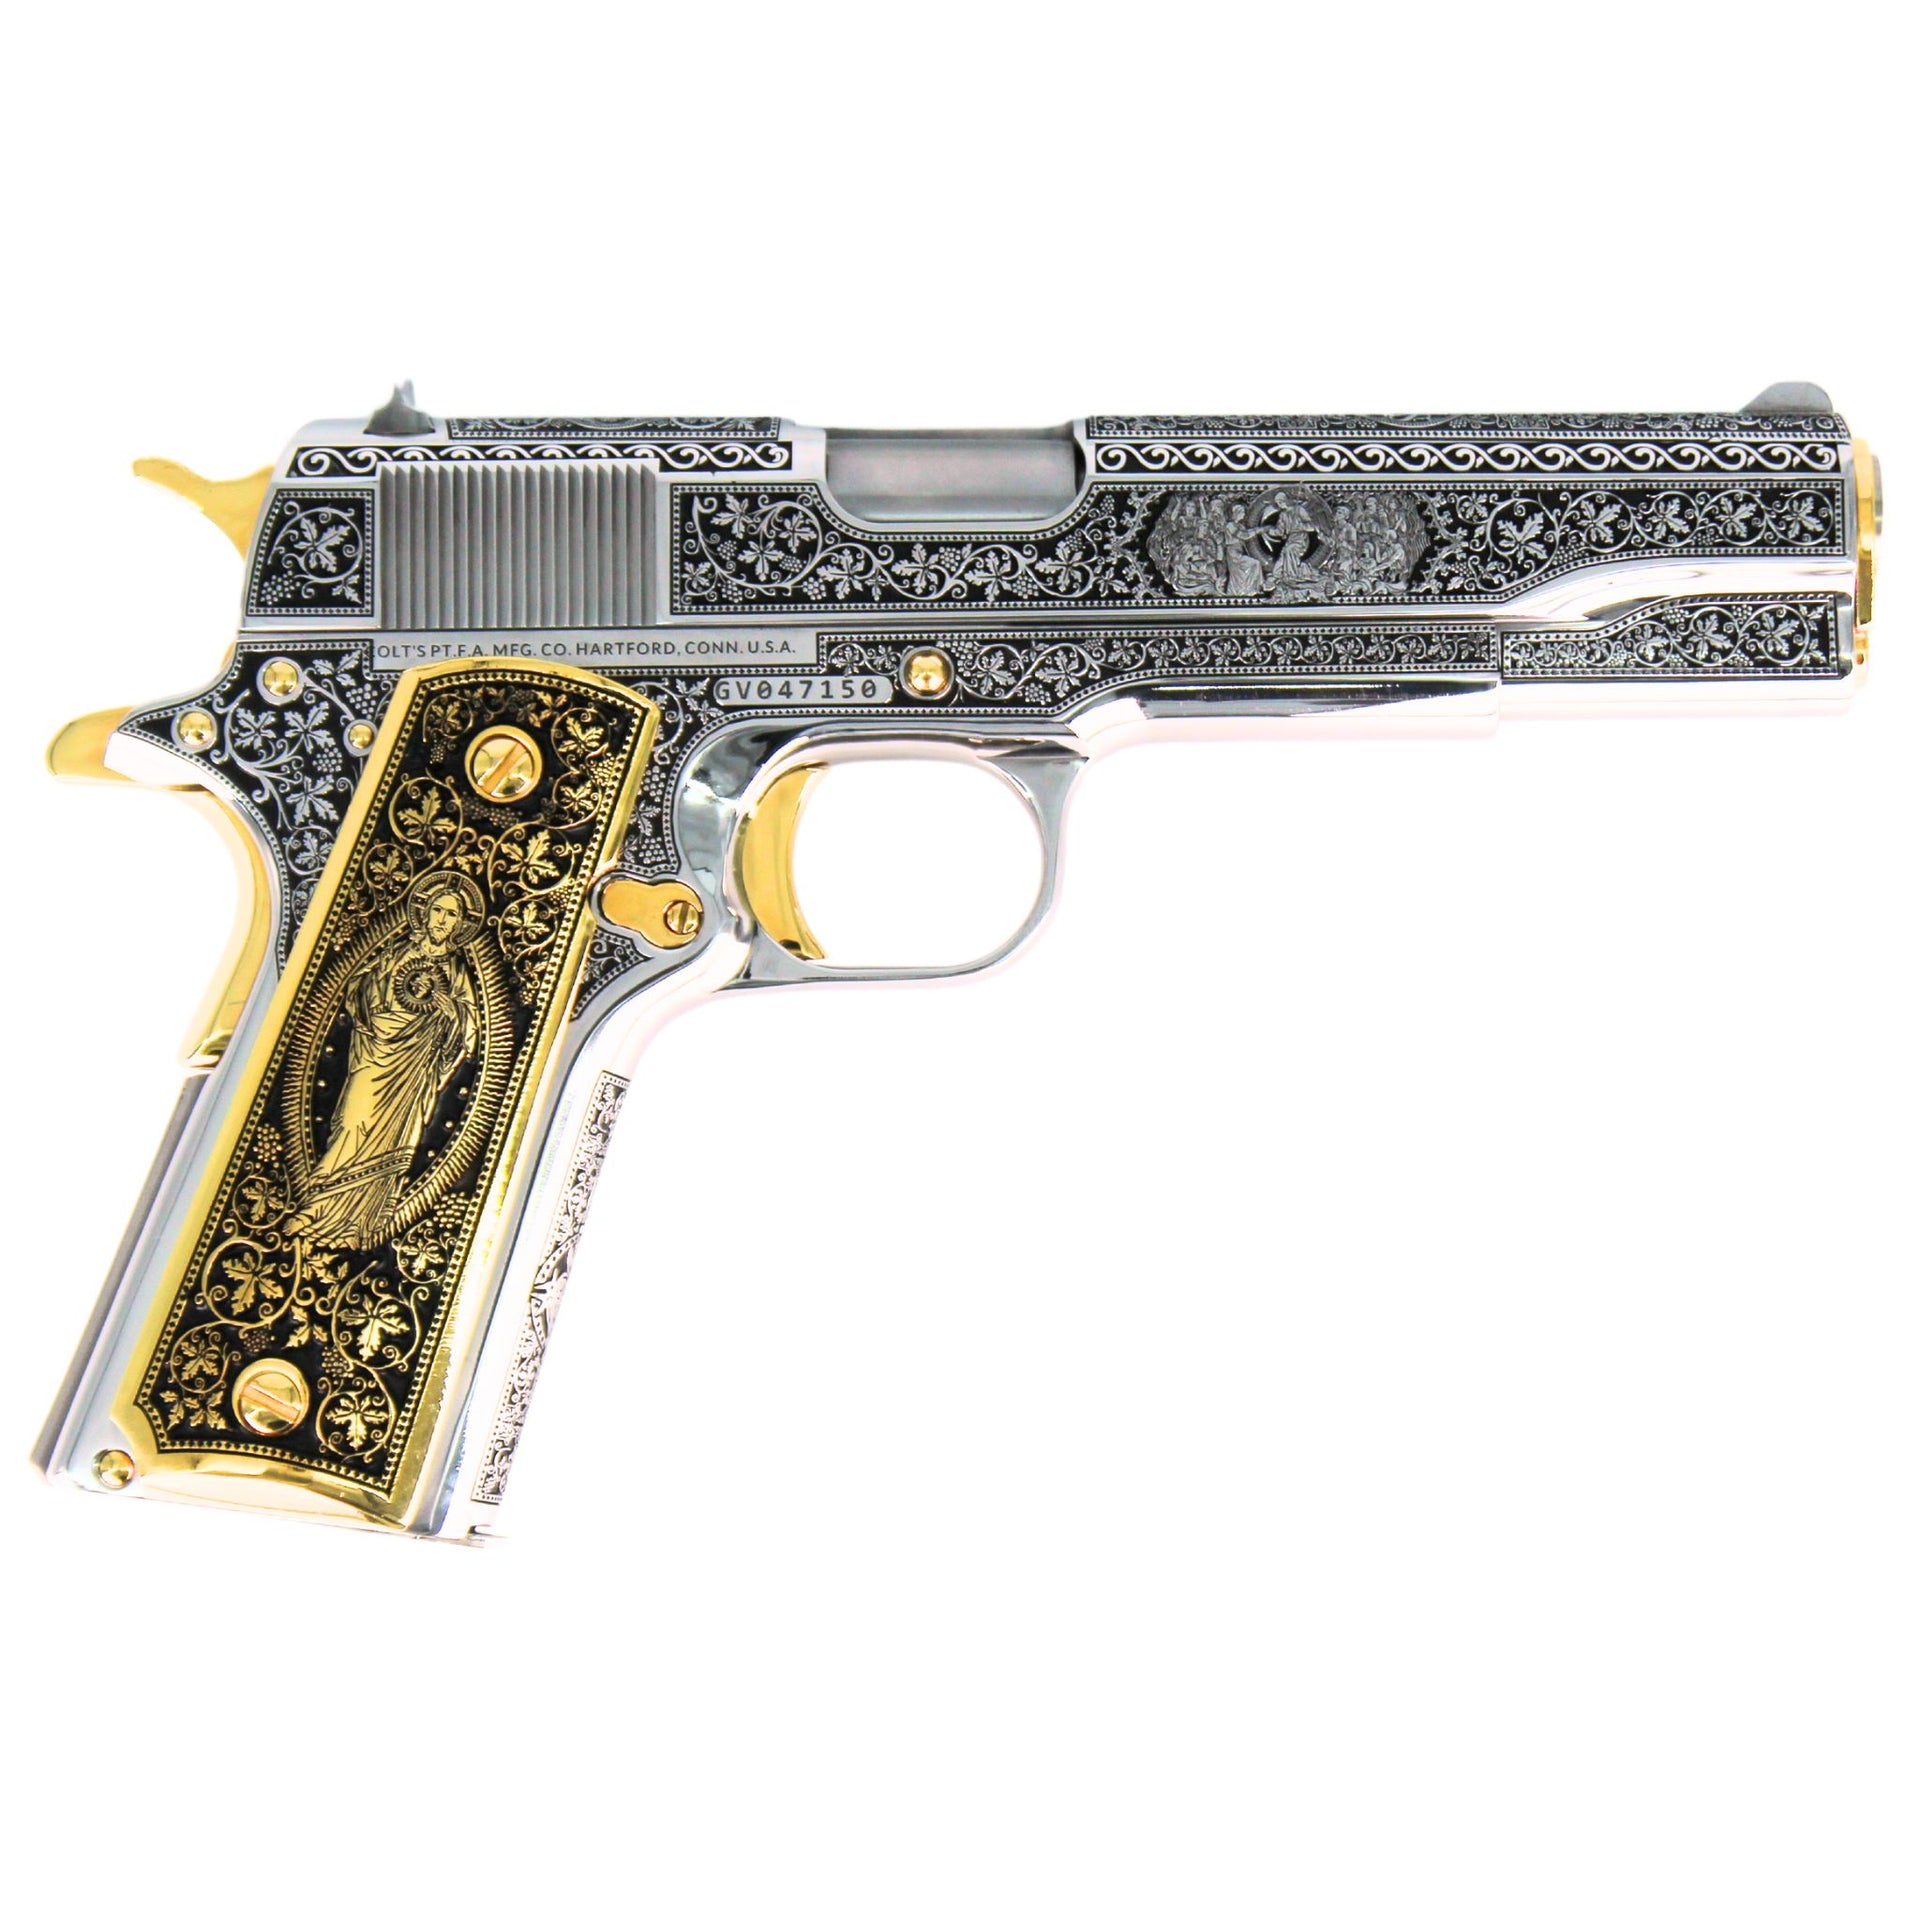 1911 Colt Government, 45 ACP, Cathedral design , High Polished Stainless Steel and 24K Gold Plated, SKU: 7007644418150, 098289112224, GOLD GUN